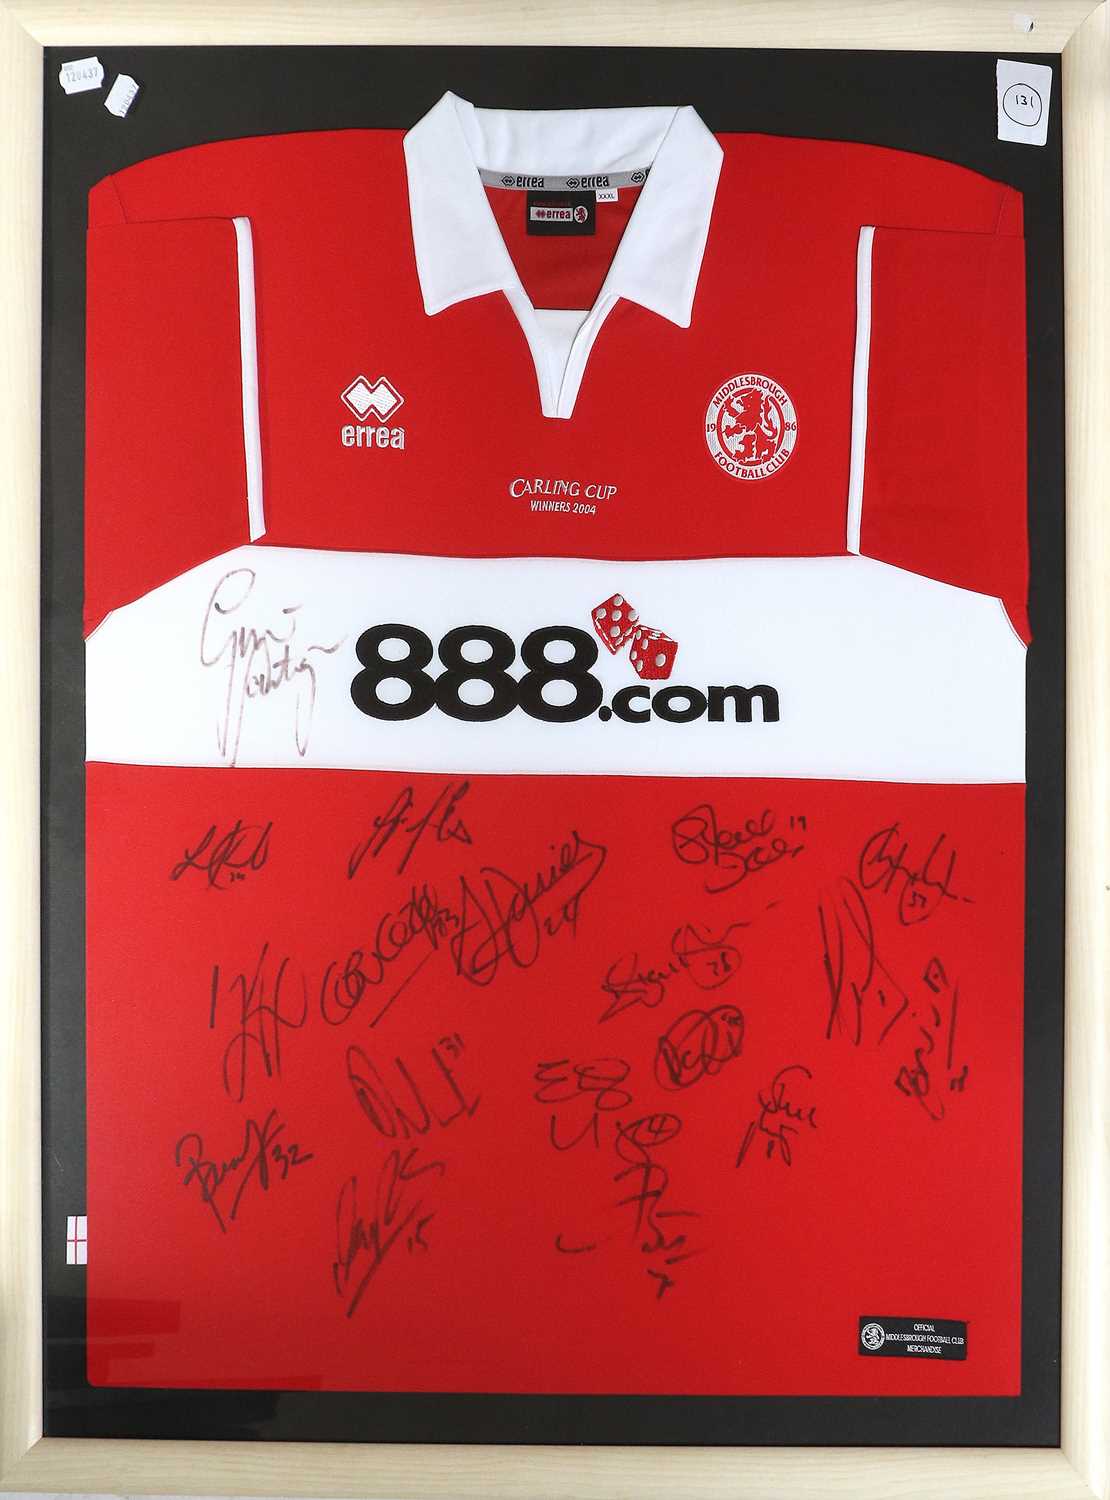 Middlesbrough Football Club Two Signed Shirts - Image 3 of 3